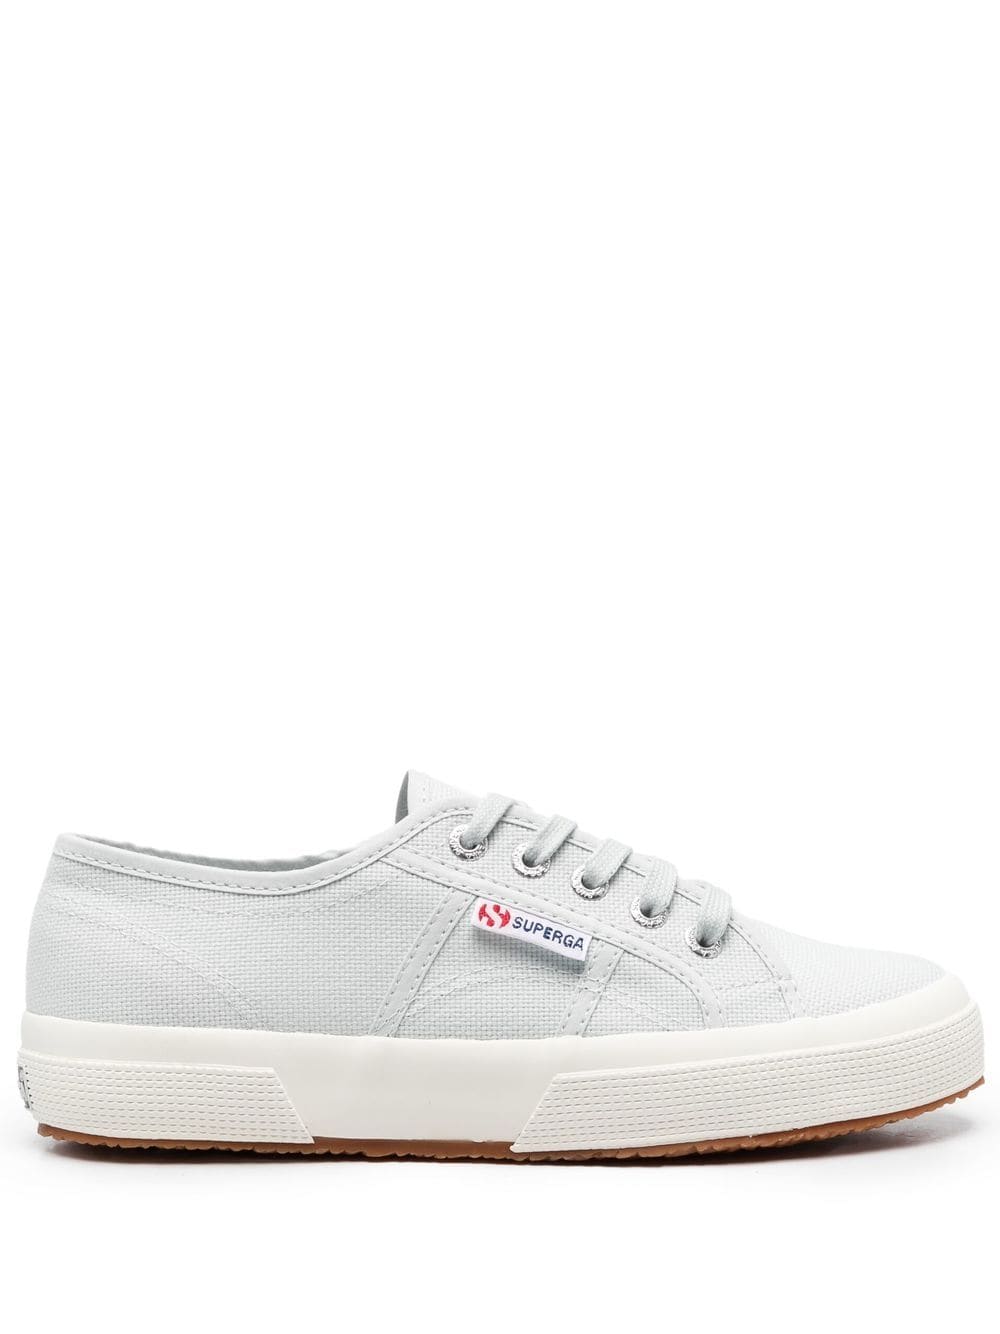 Image 1 of Superga low-top cotton sneakers